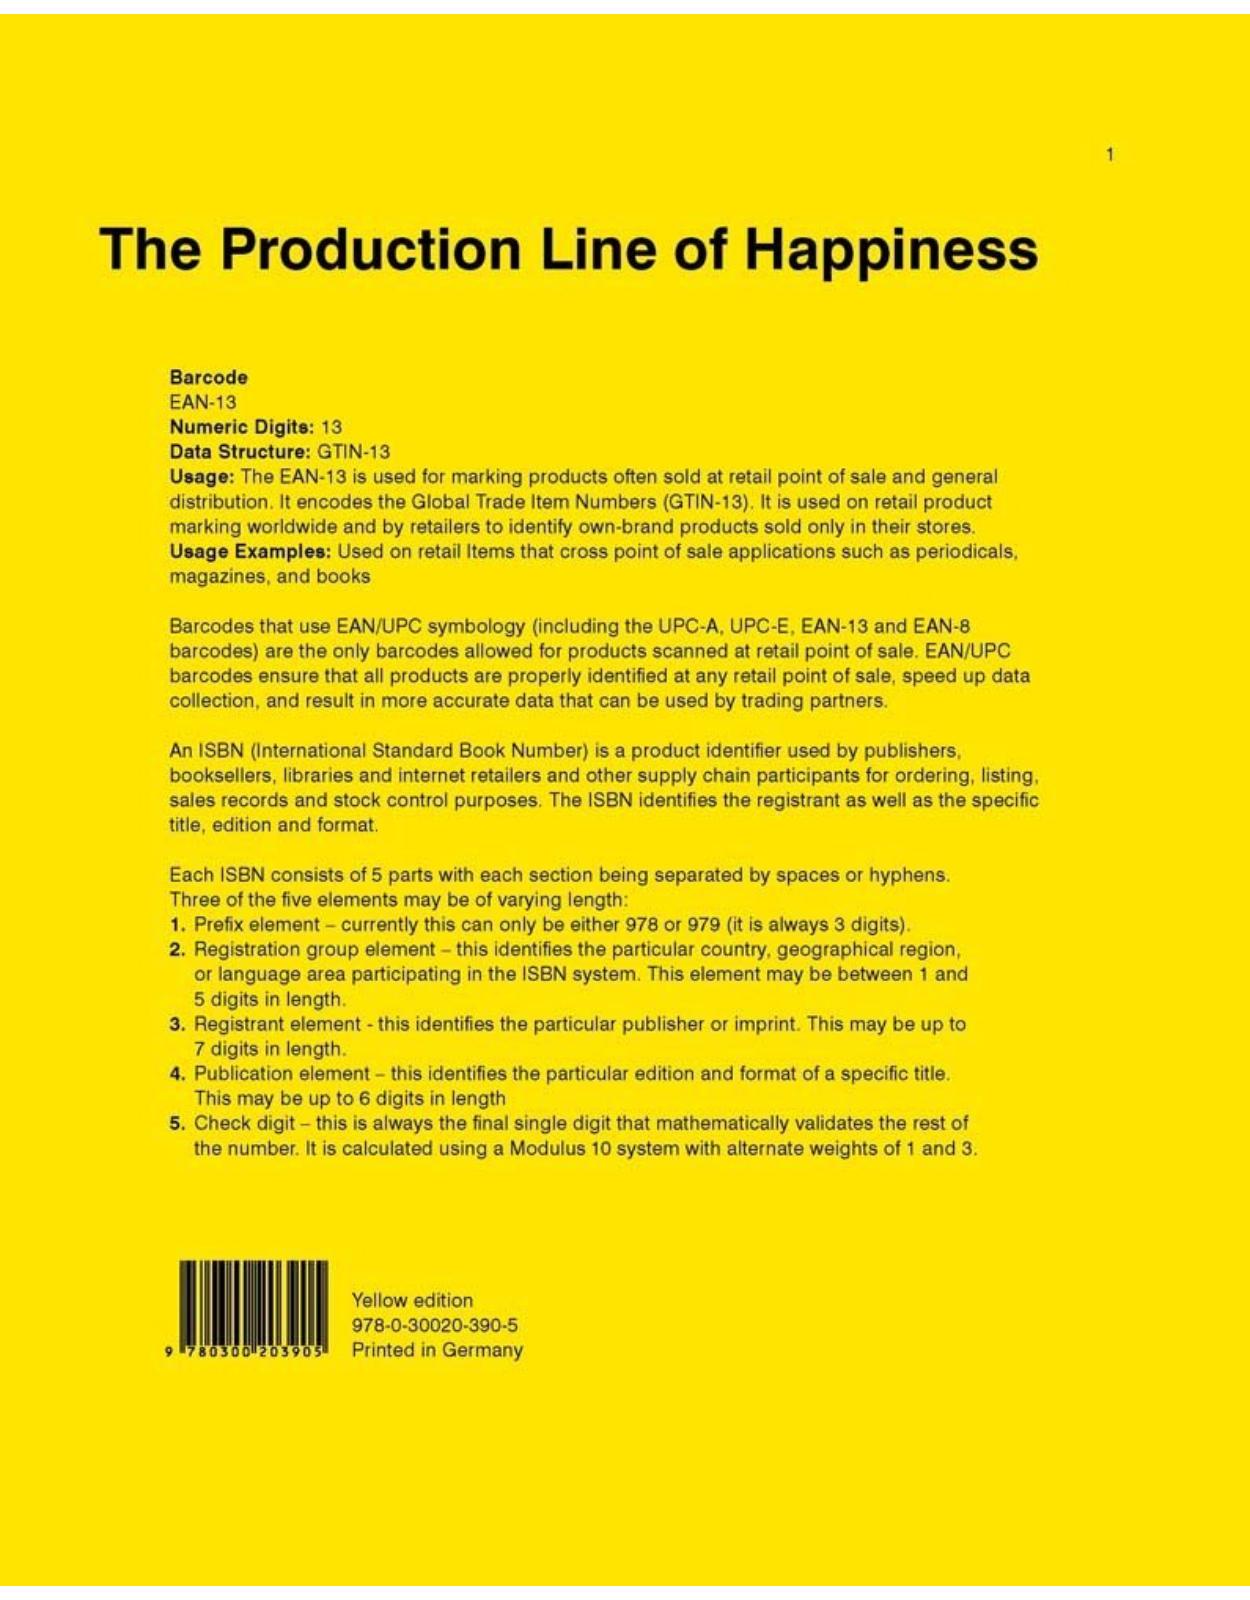 Christopher Williams. The Production Line of Happiness